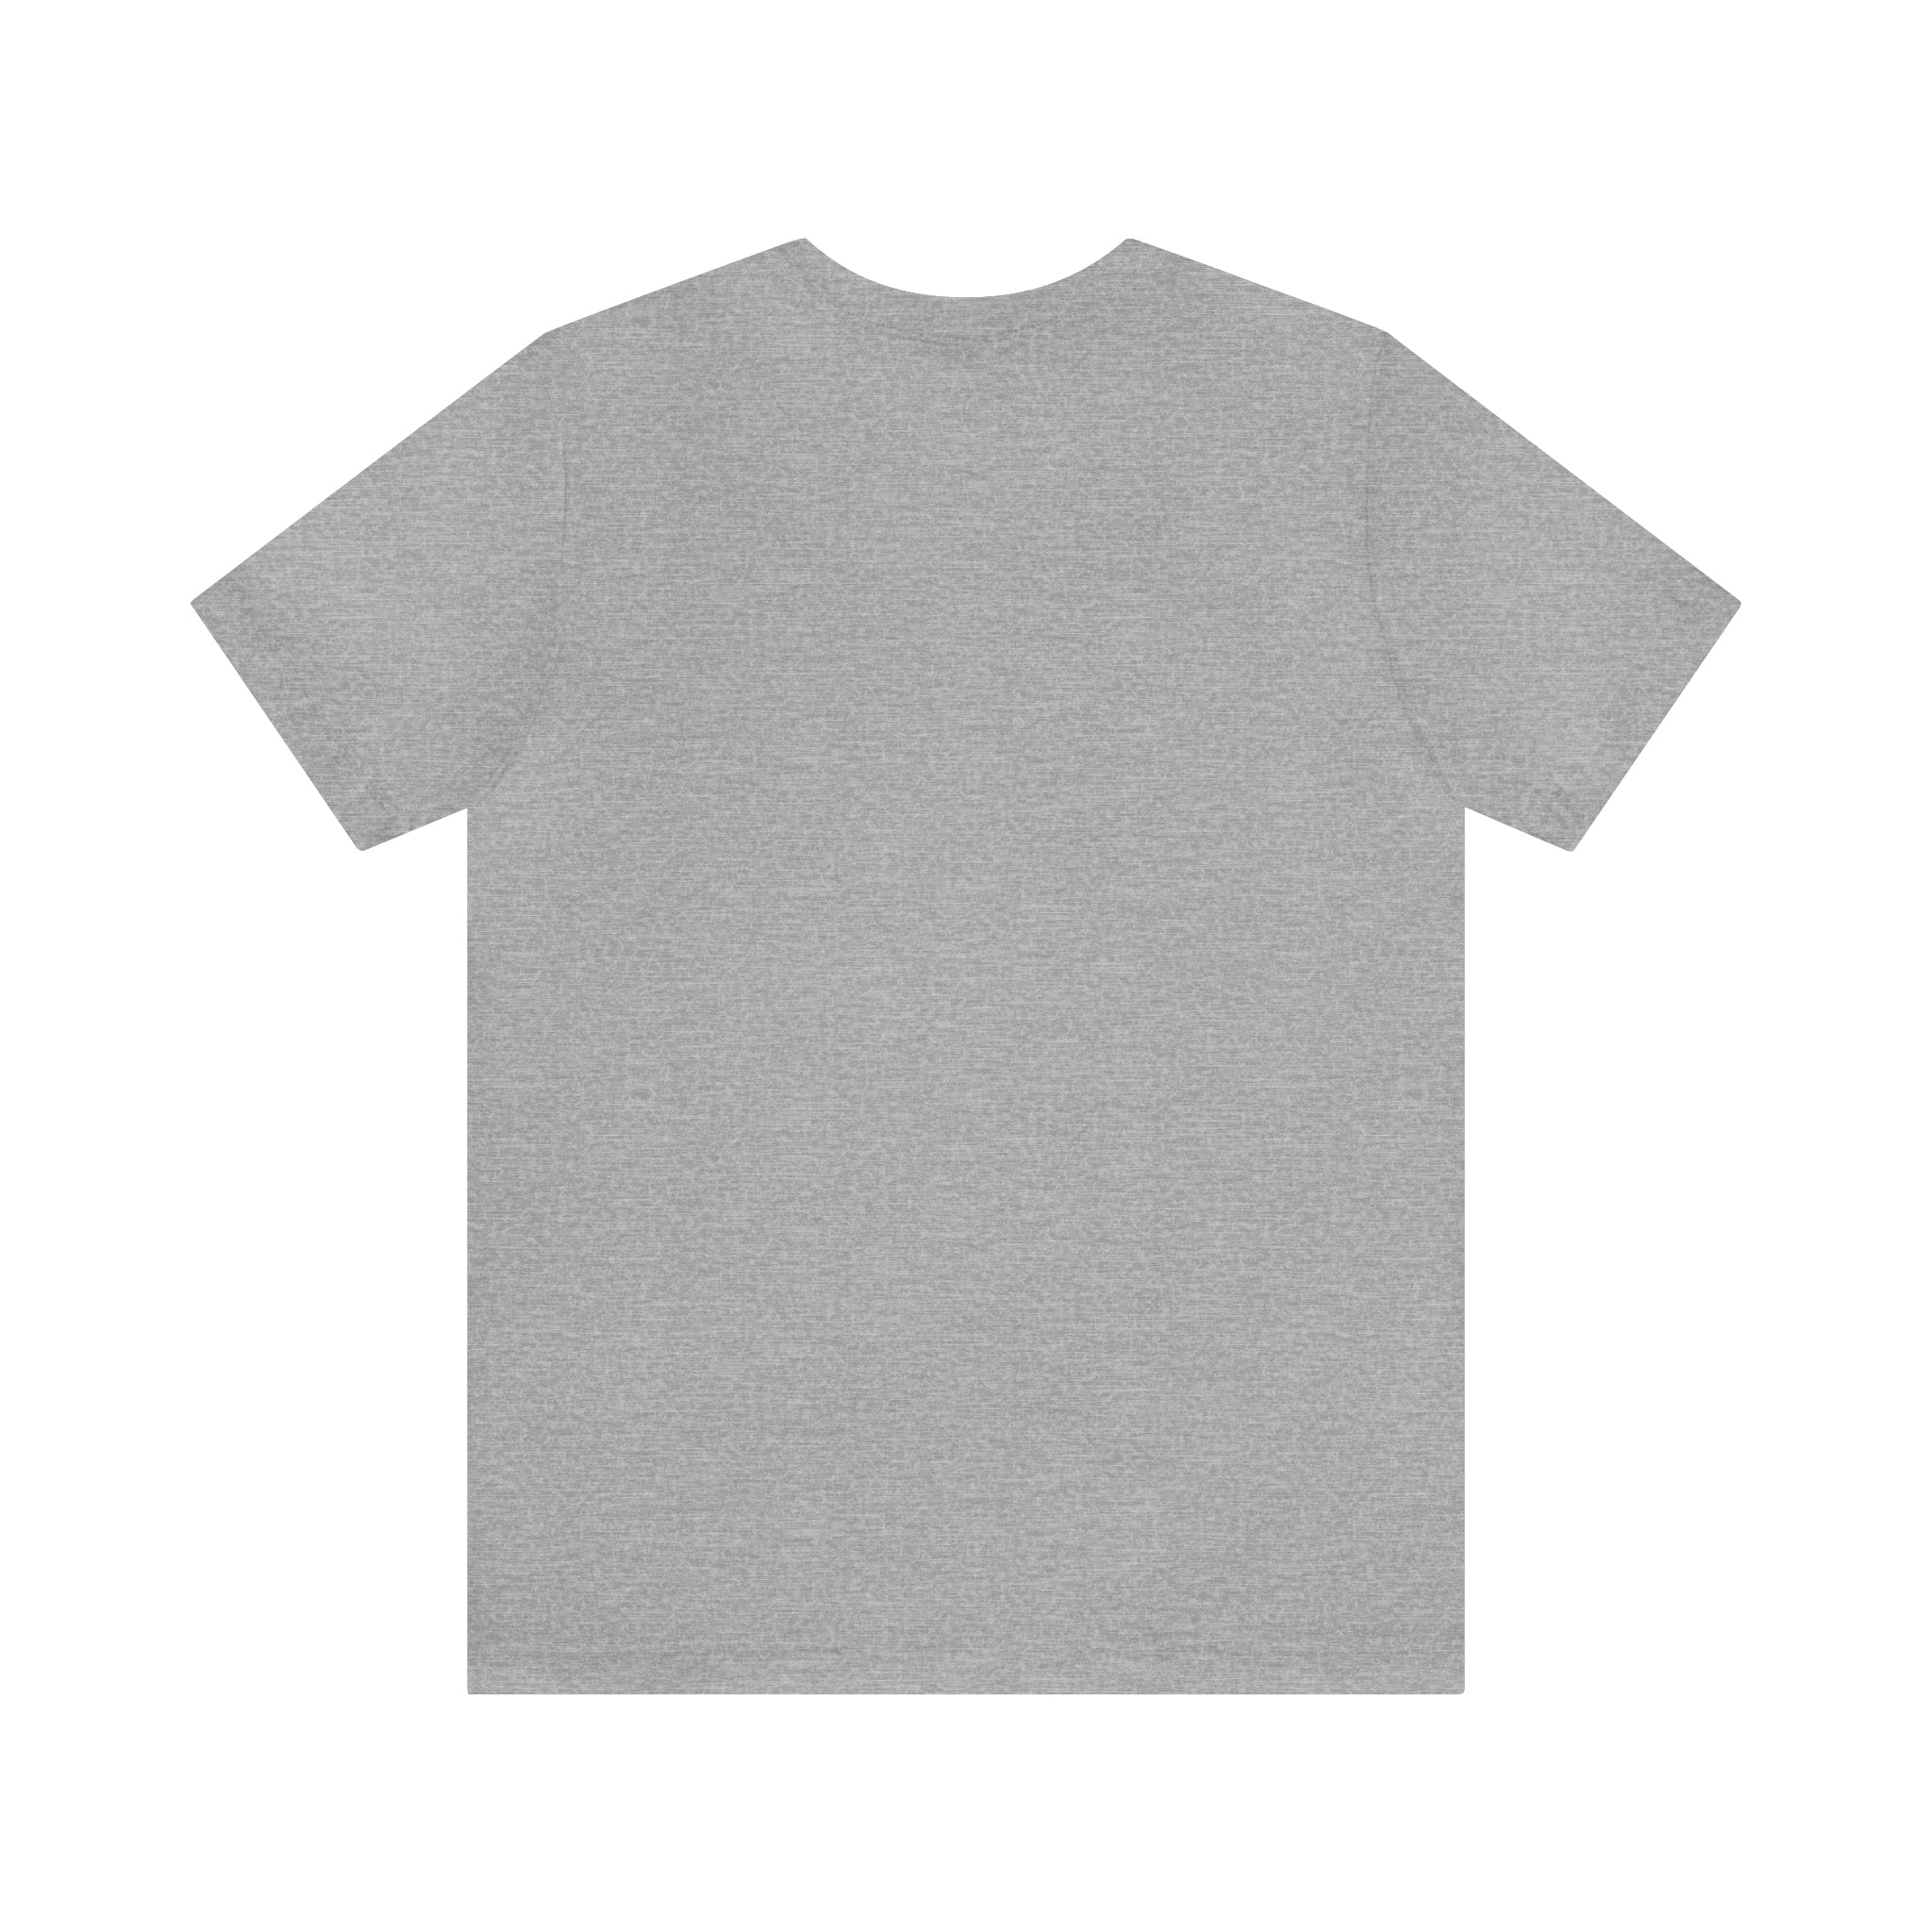 Unisex Jersey Short Sleeve Tee - Spruced Roost